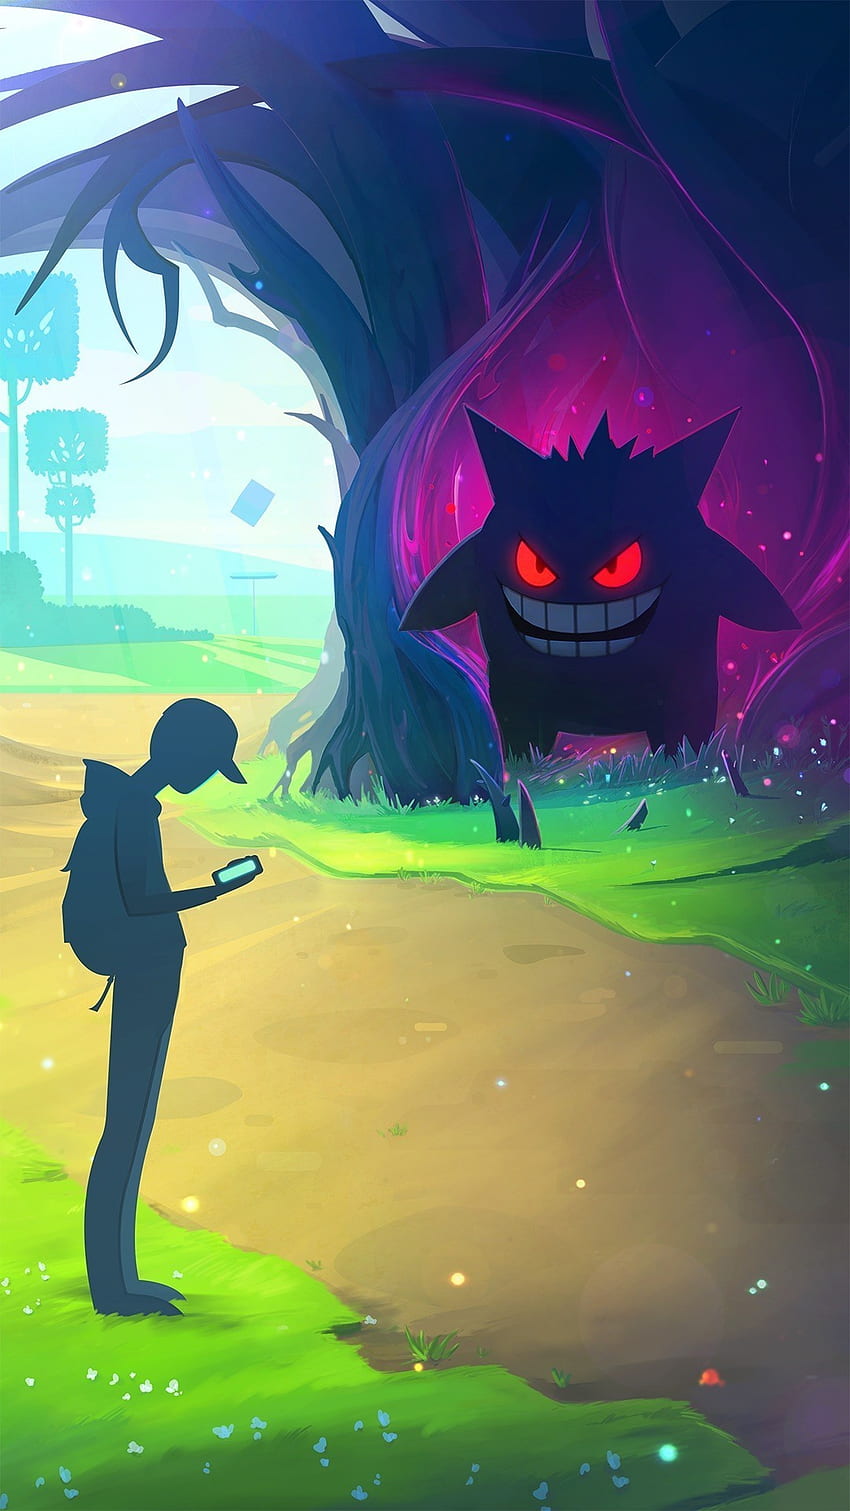 A trainer checks his Nearby radar while Gengar emerges, eyes glowing red, from the ghostly bowels of an ancient PokÃ©mon tree. HD phone wallpaper